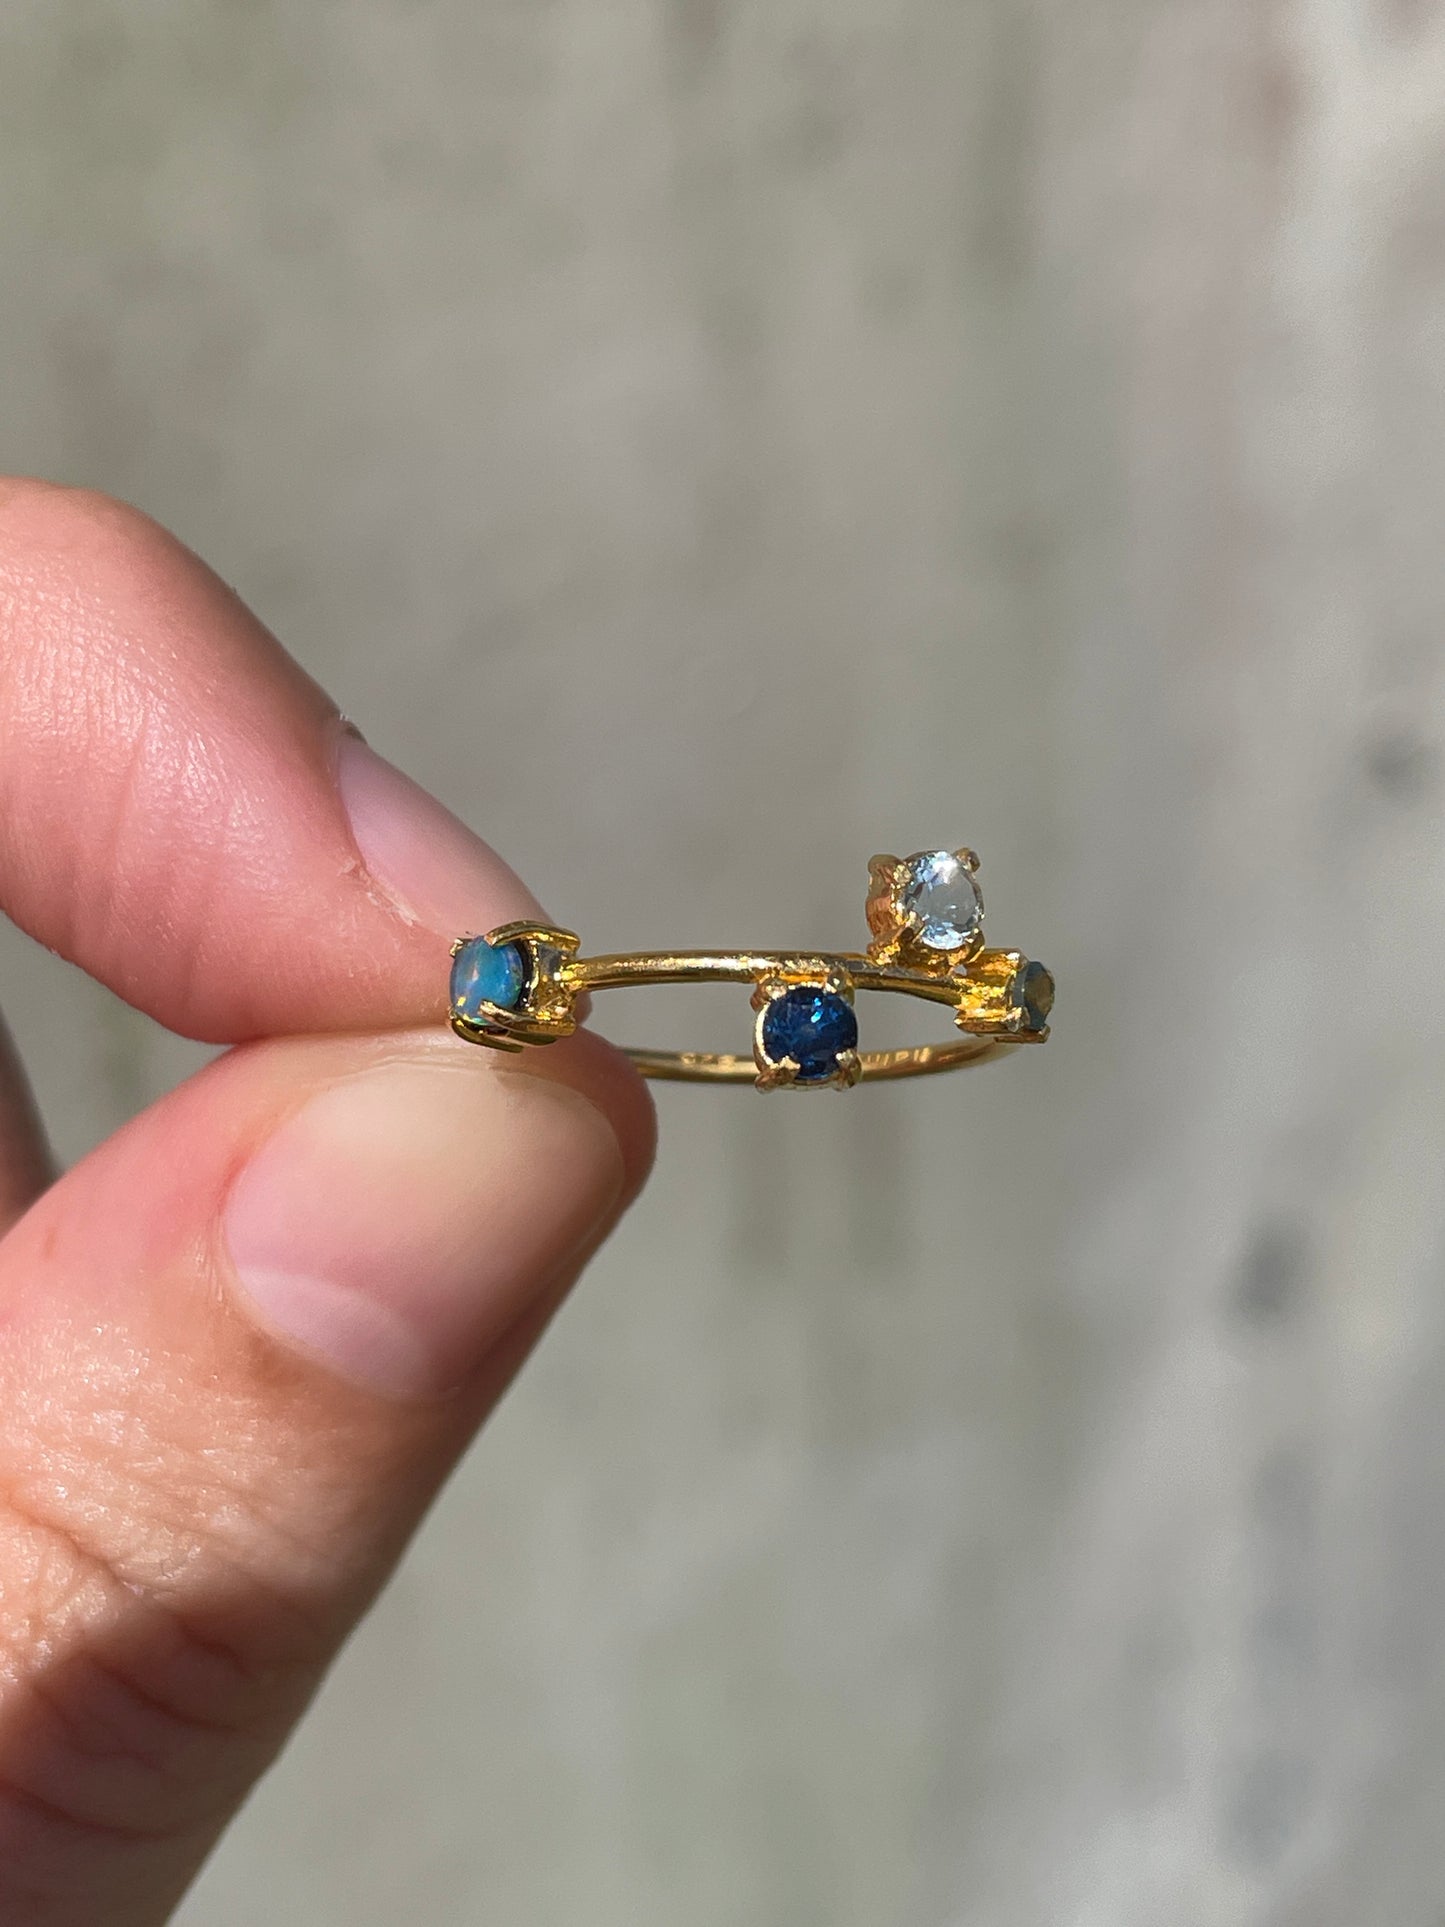 Galaxy Ring Gold with Ultramarine Blue Sapphires and Opals - size 7